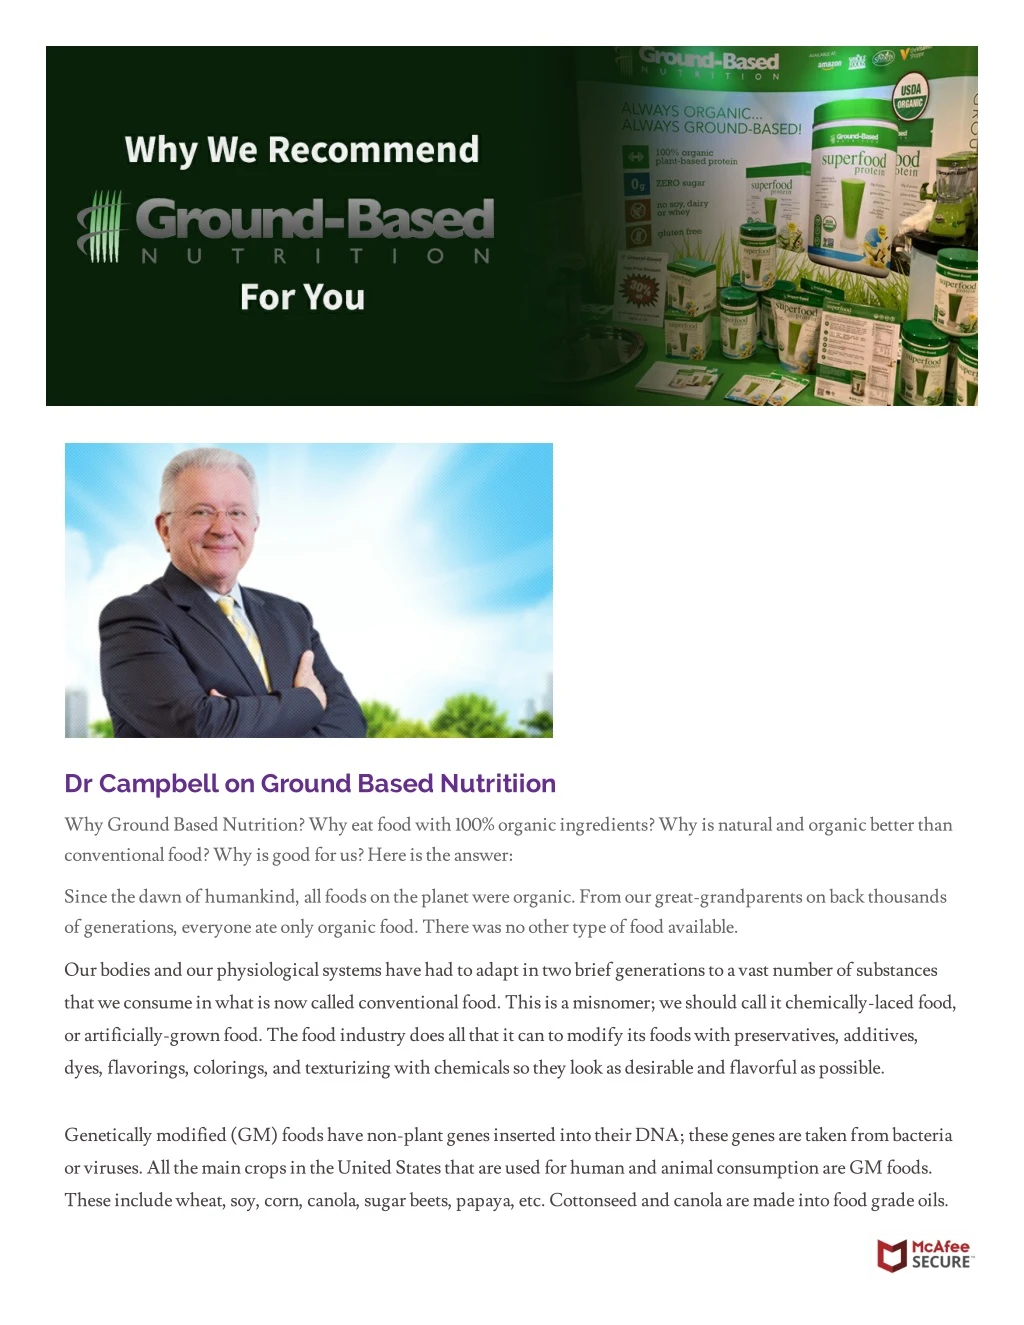 dr campbell on ground based nutritiion